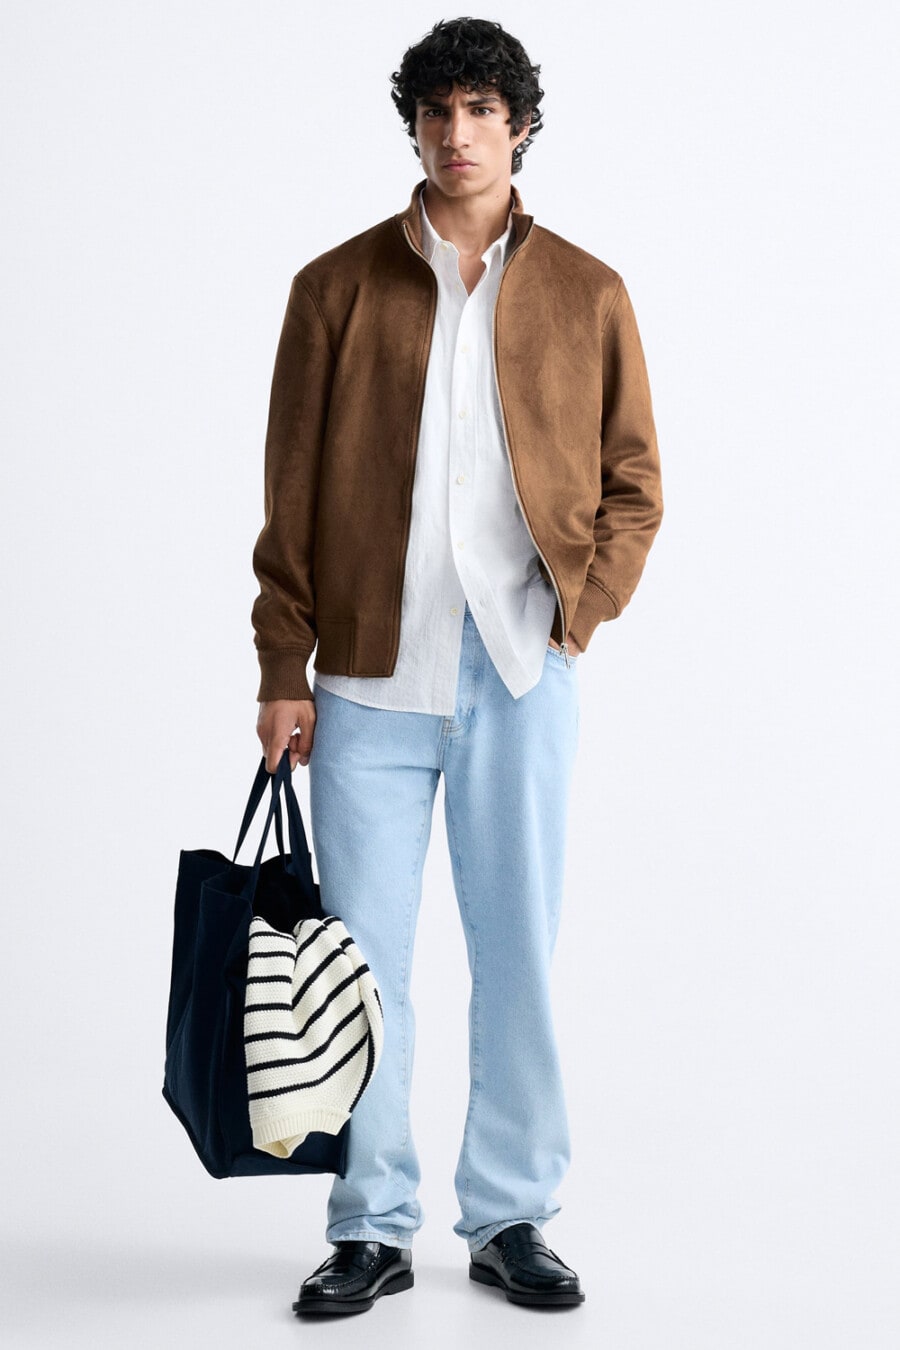 Men's light blue baggy jeans, white shirt, tan suede jacket, black Derby shoes and black tote bag outfit